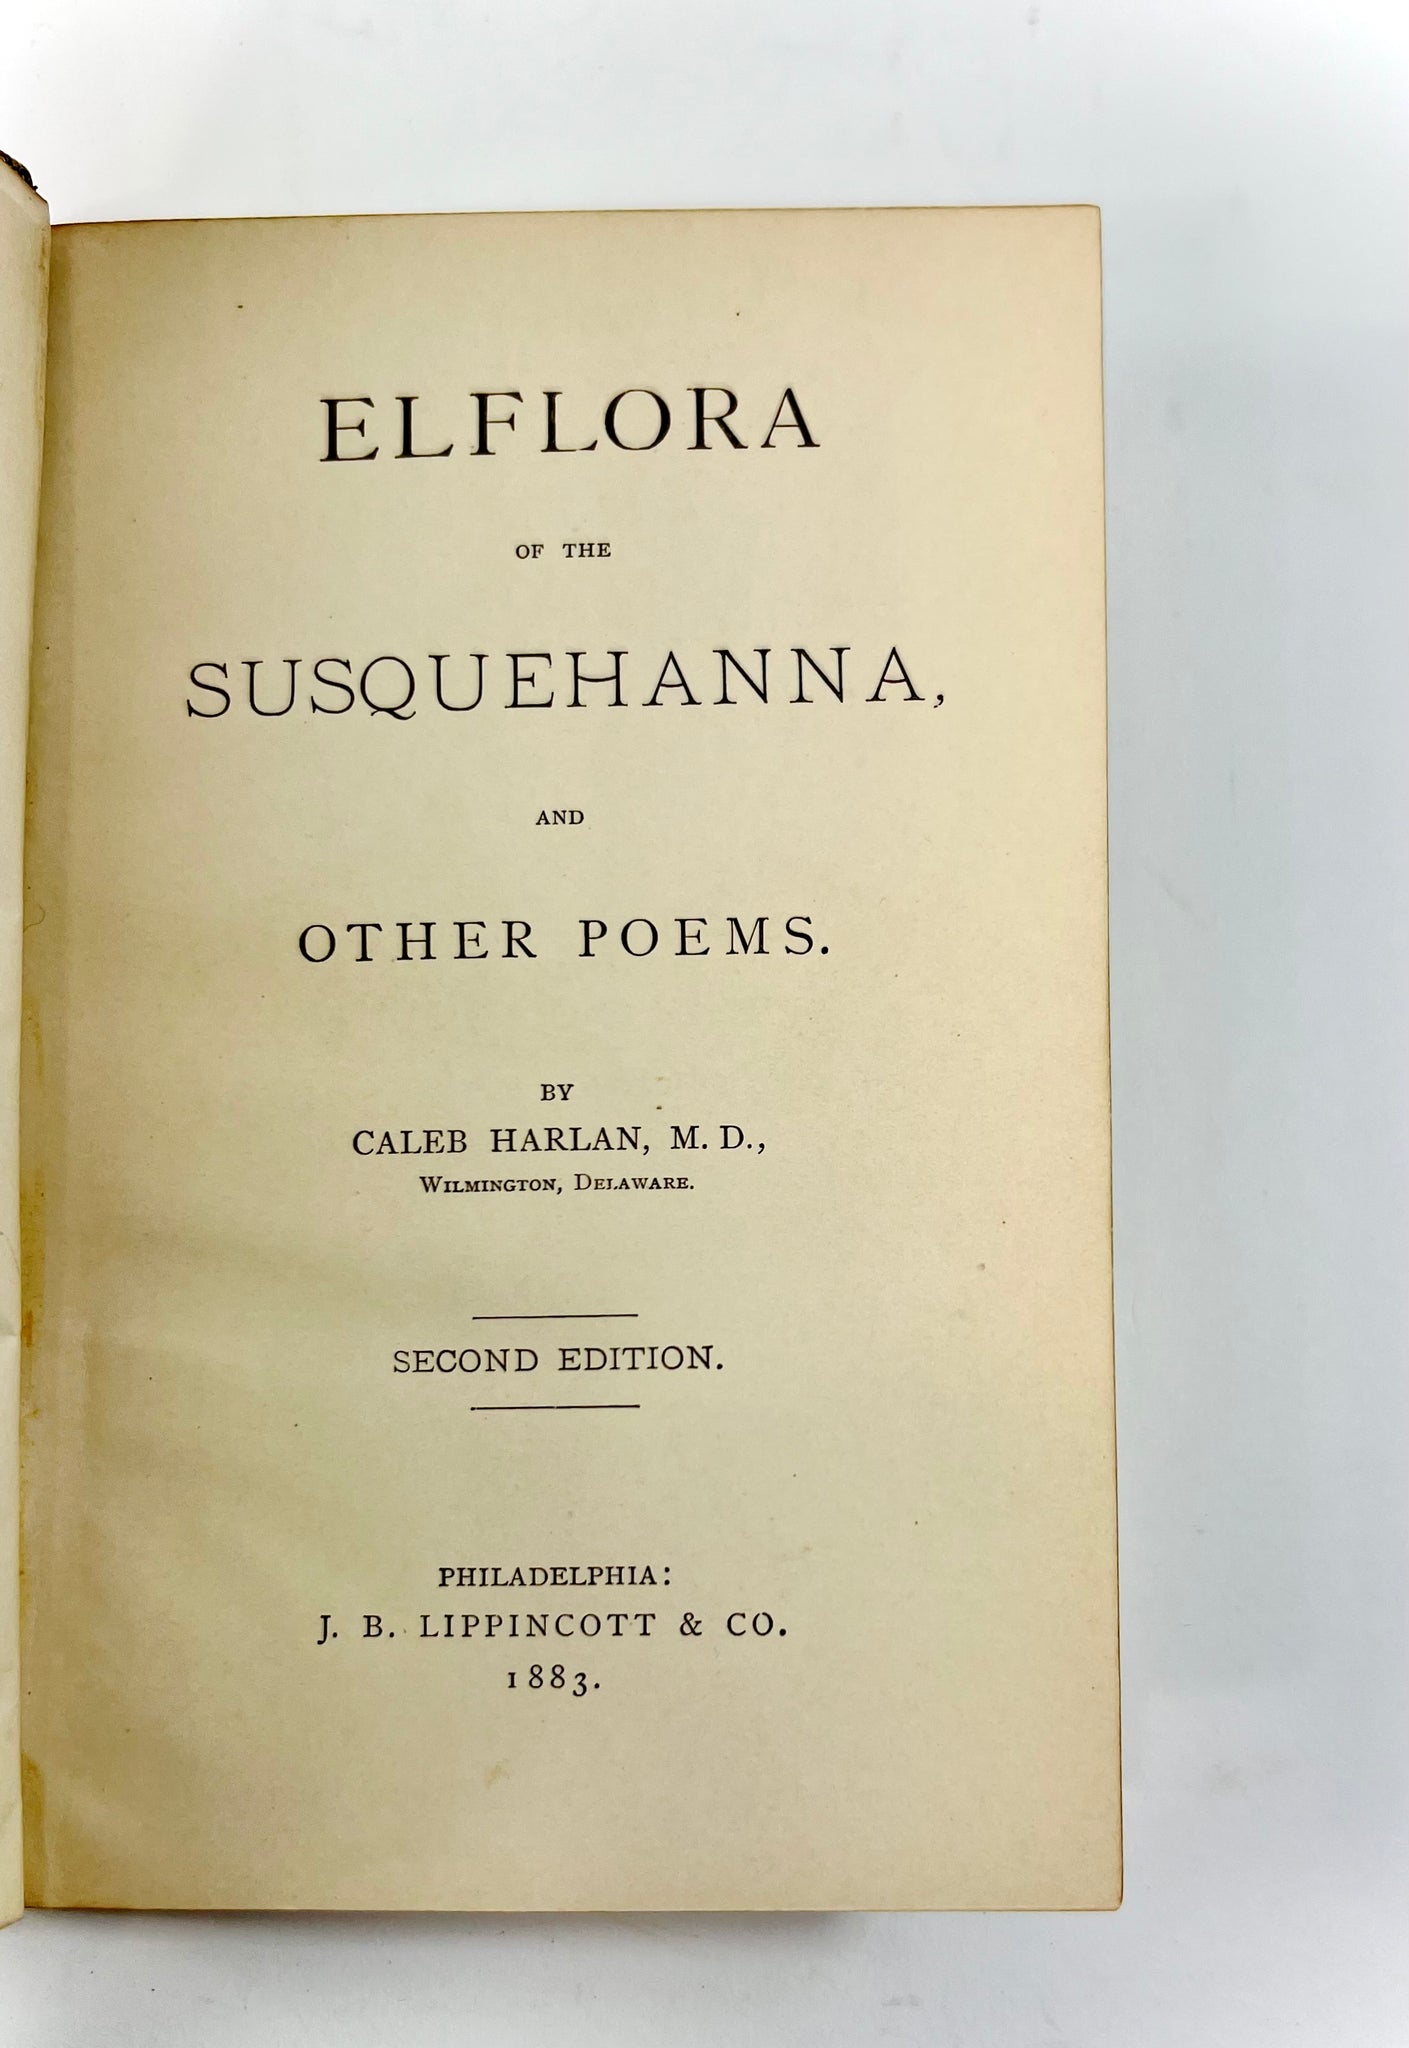 HARLAN, Caleb. Elflora of the Susquehanna, and Other Poems.